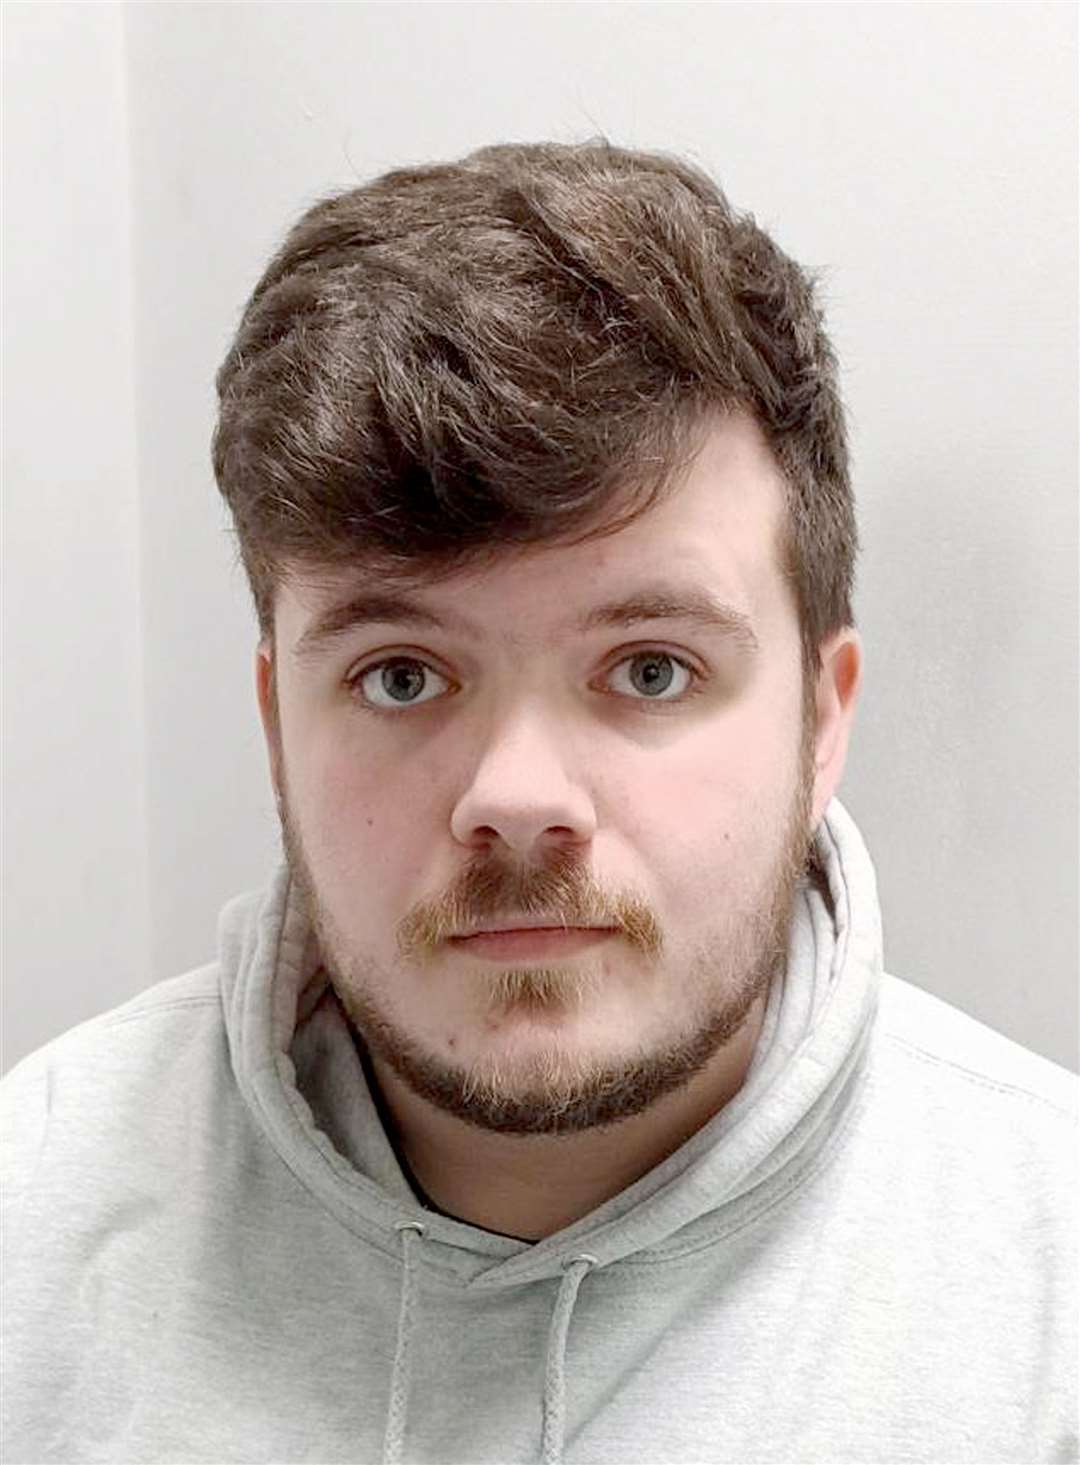 Jacob Crimi-Appleby was sentenced to three years and eight months in prison for causing GBH with intent (Metropolitan Police/PA)